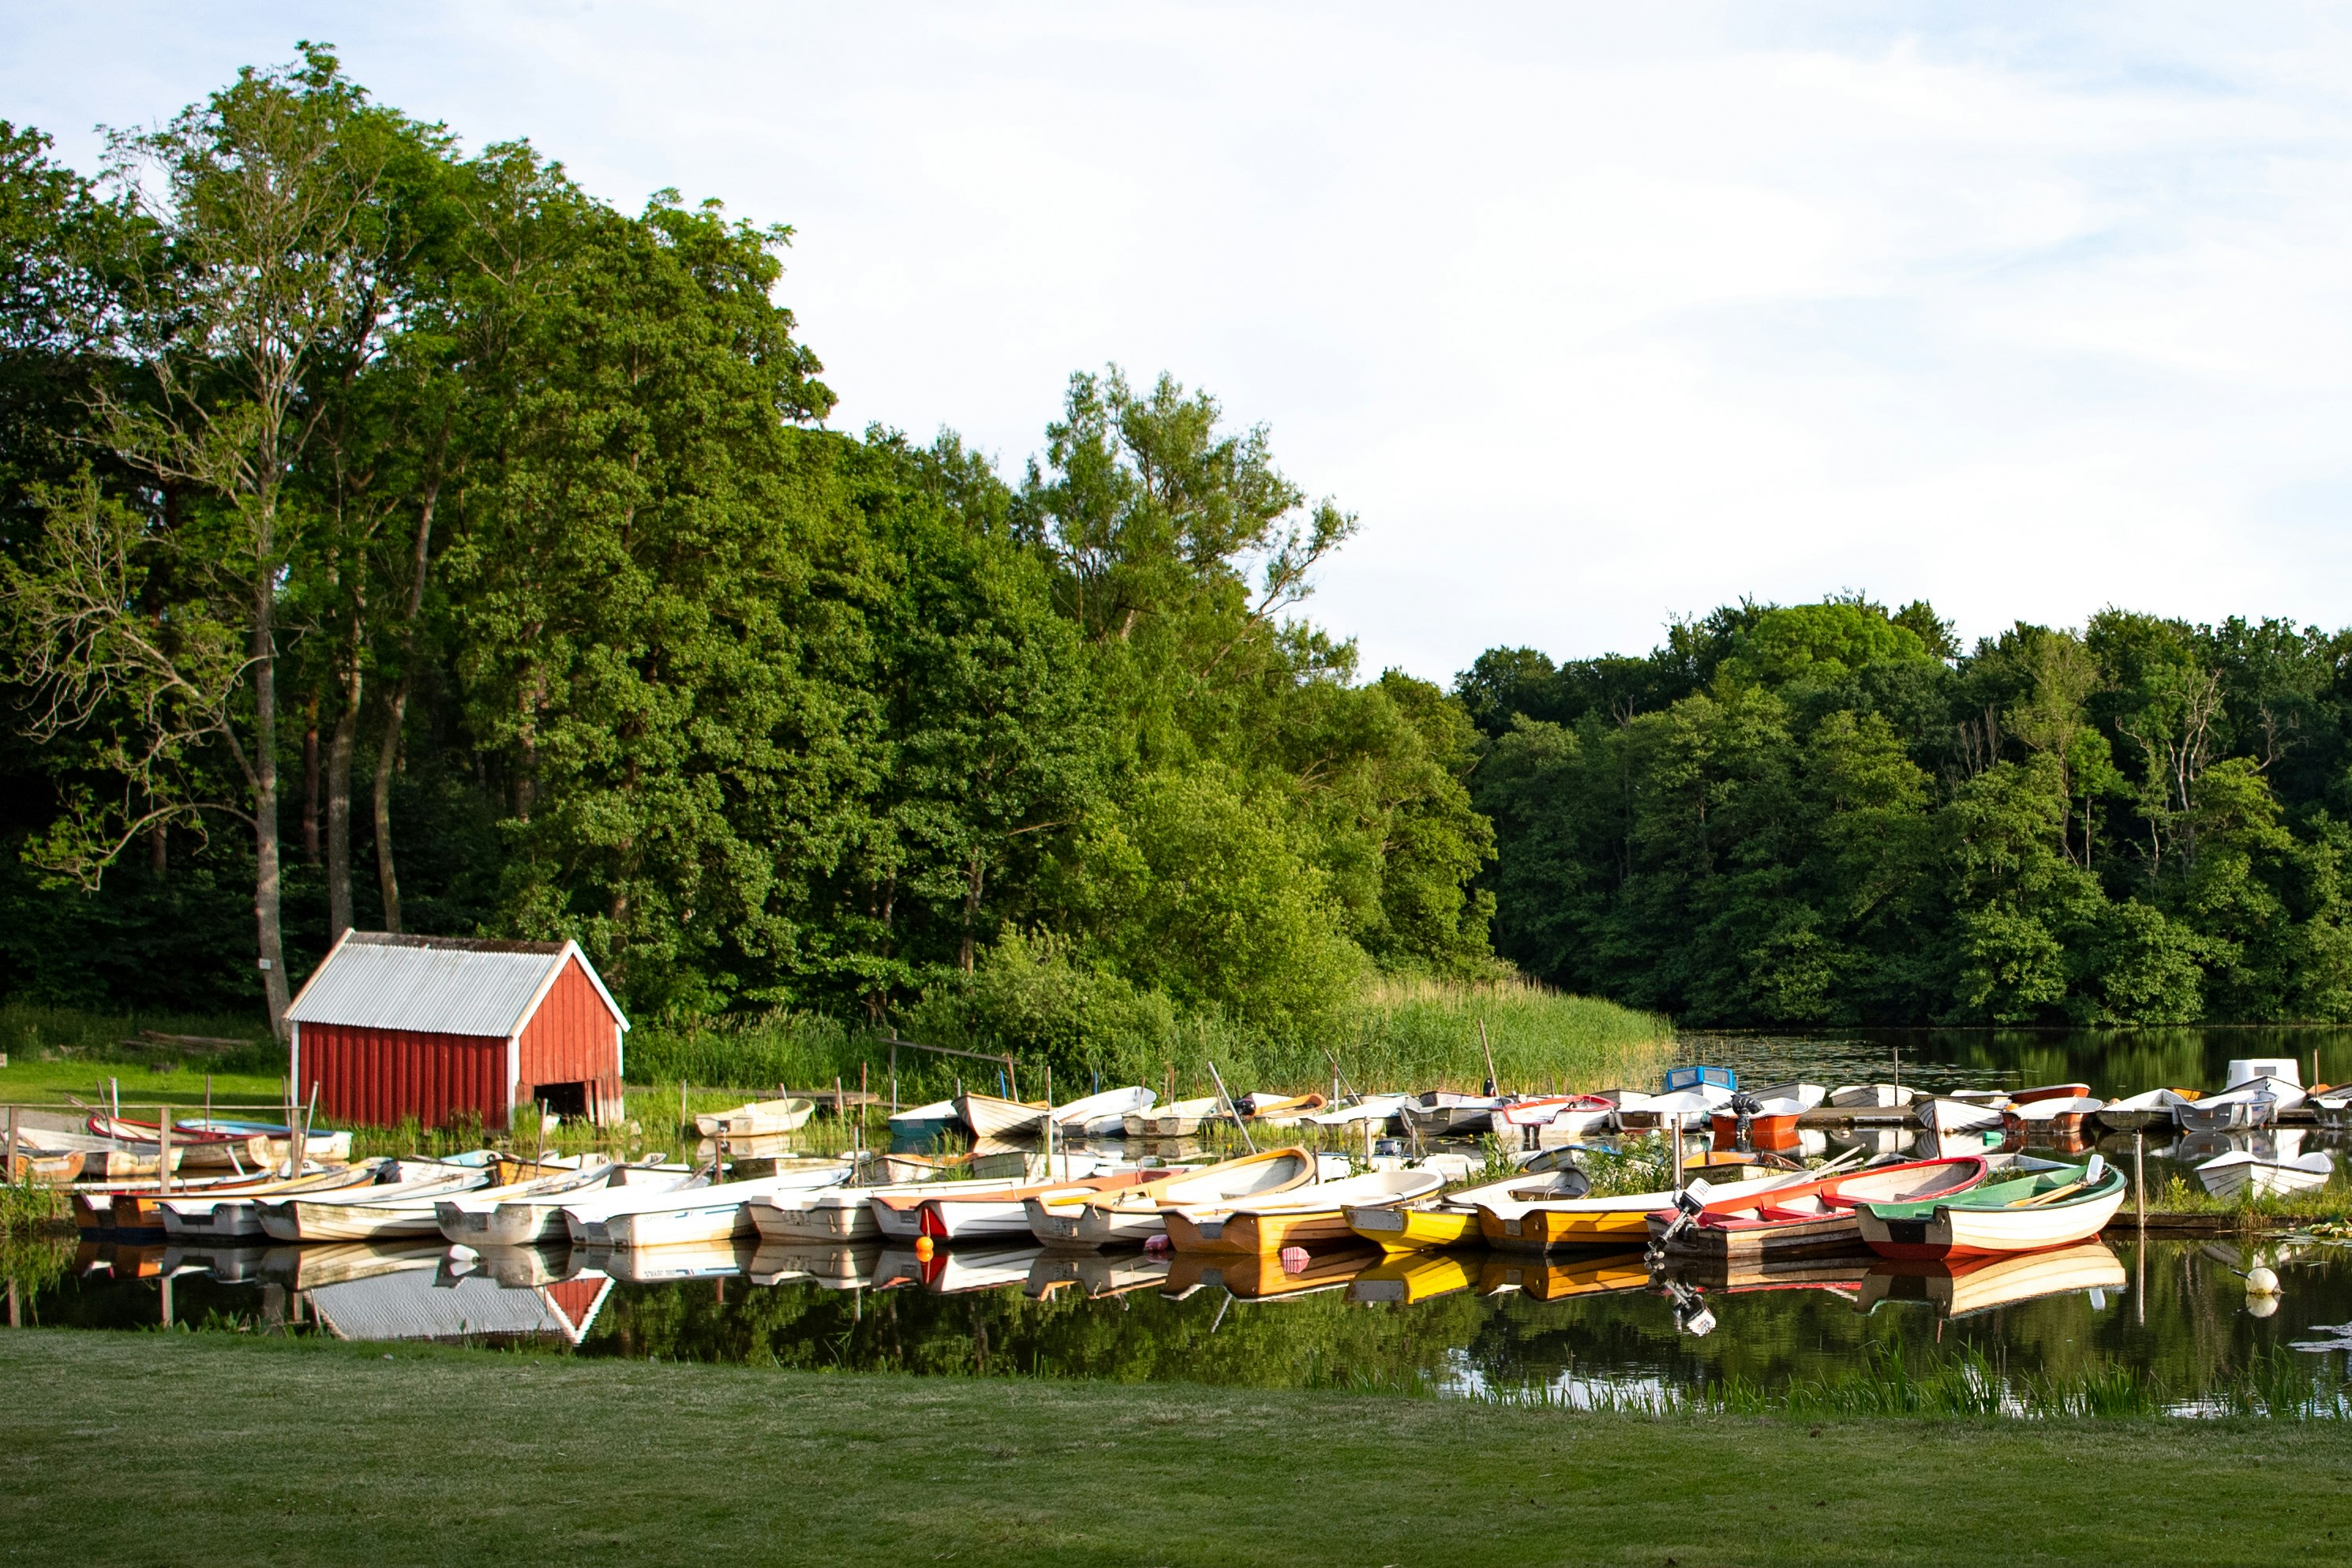 Rows of colorful rowboats and other watercraft sit next to a red shed on the shores of Lake Sövde in Skåne, Sweden